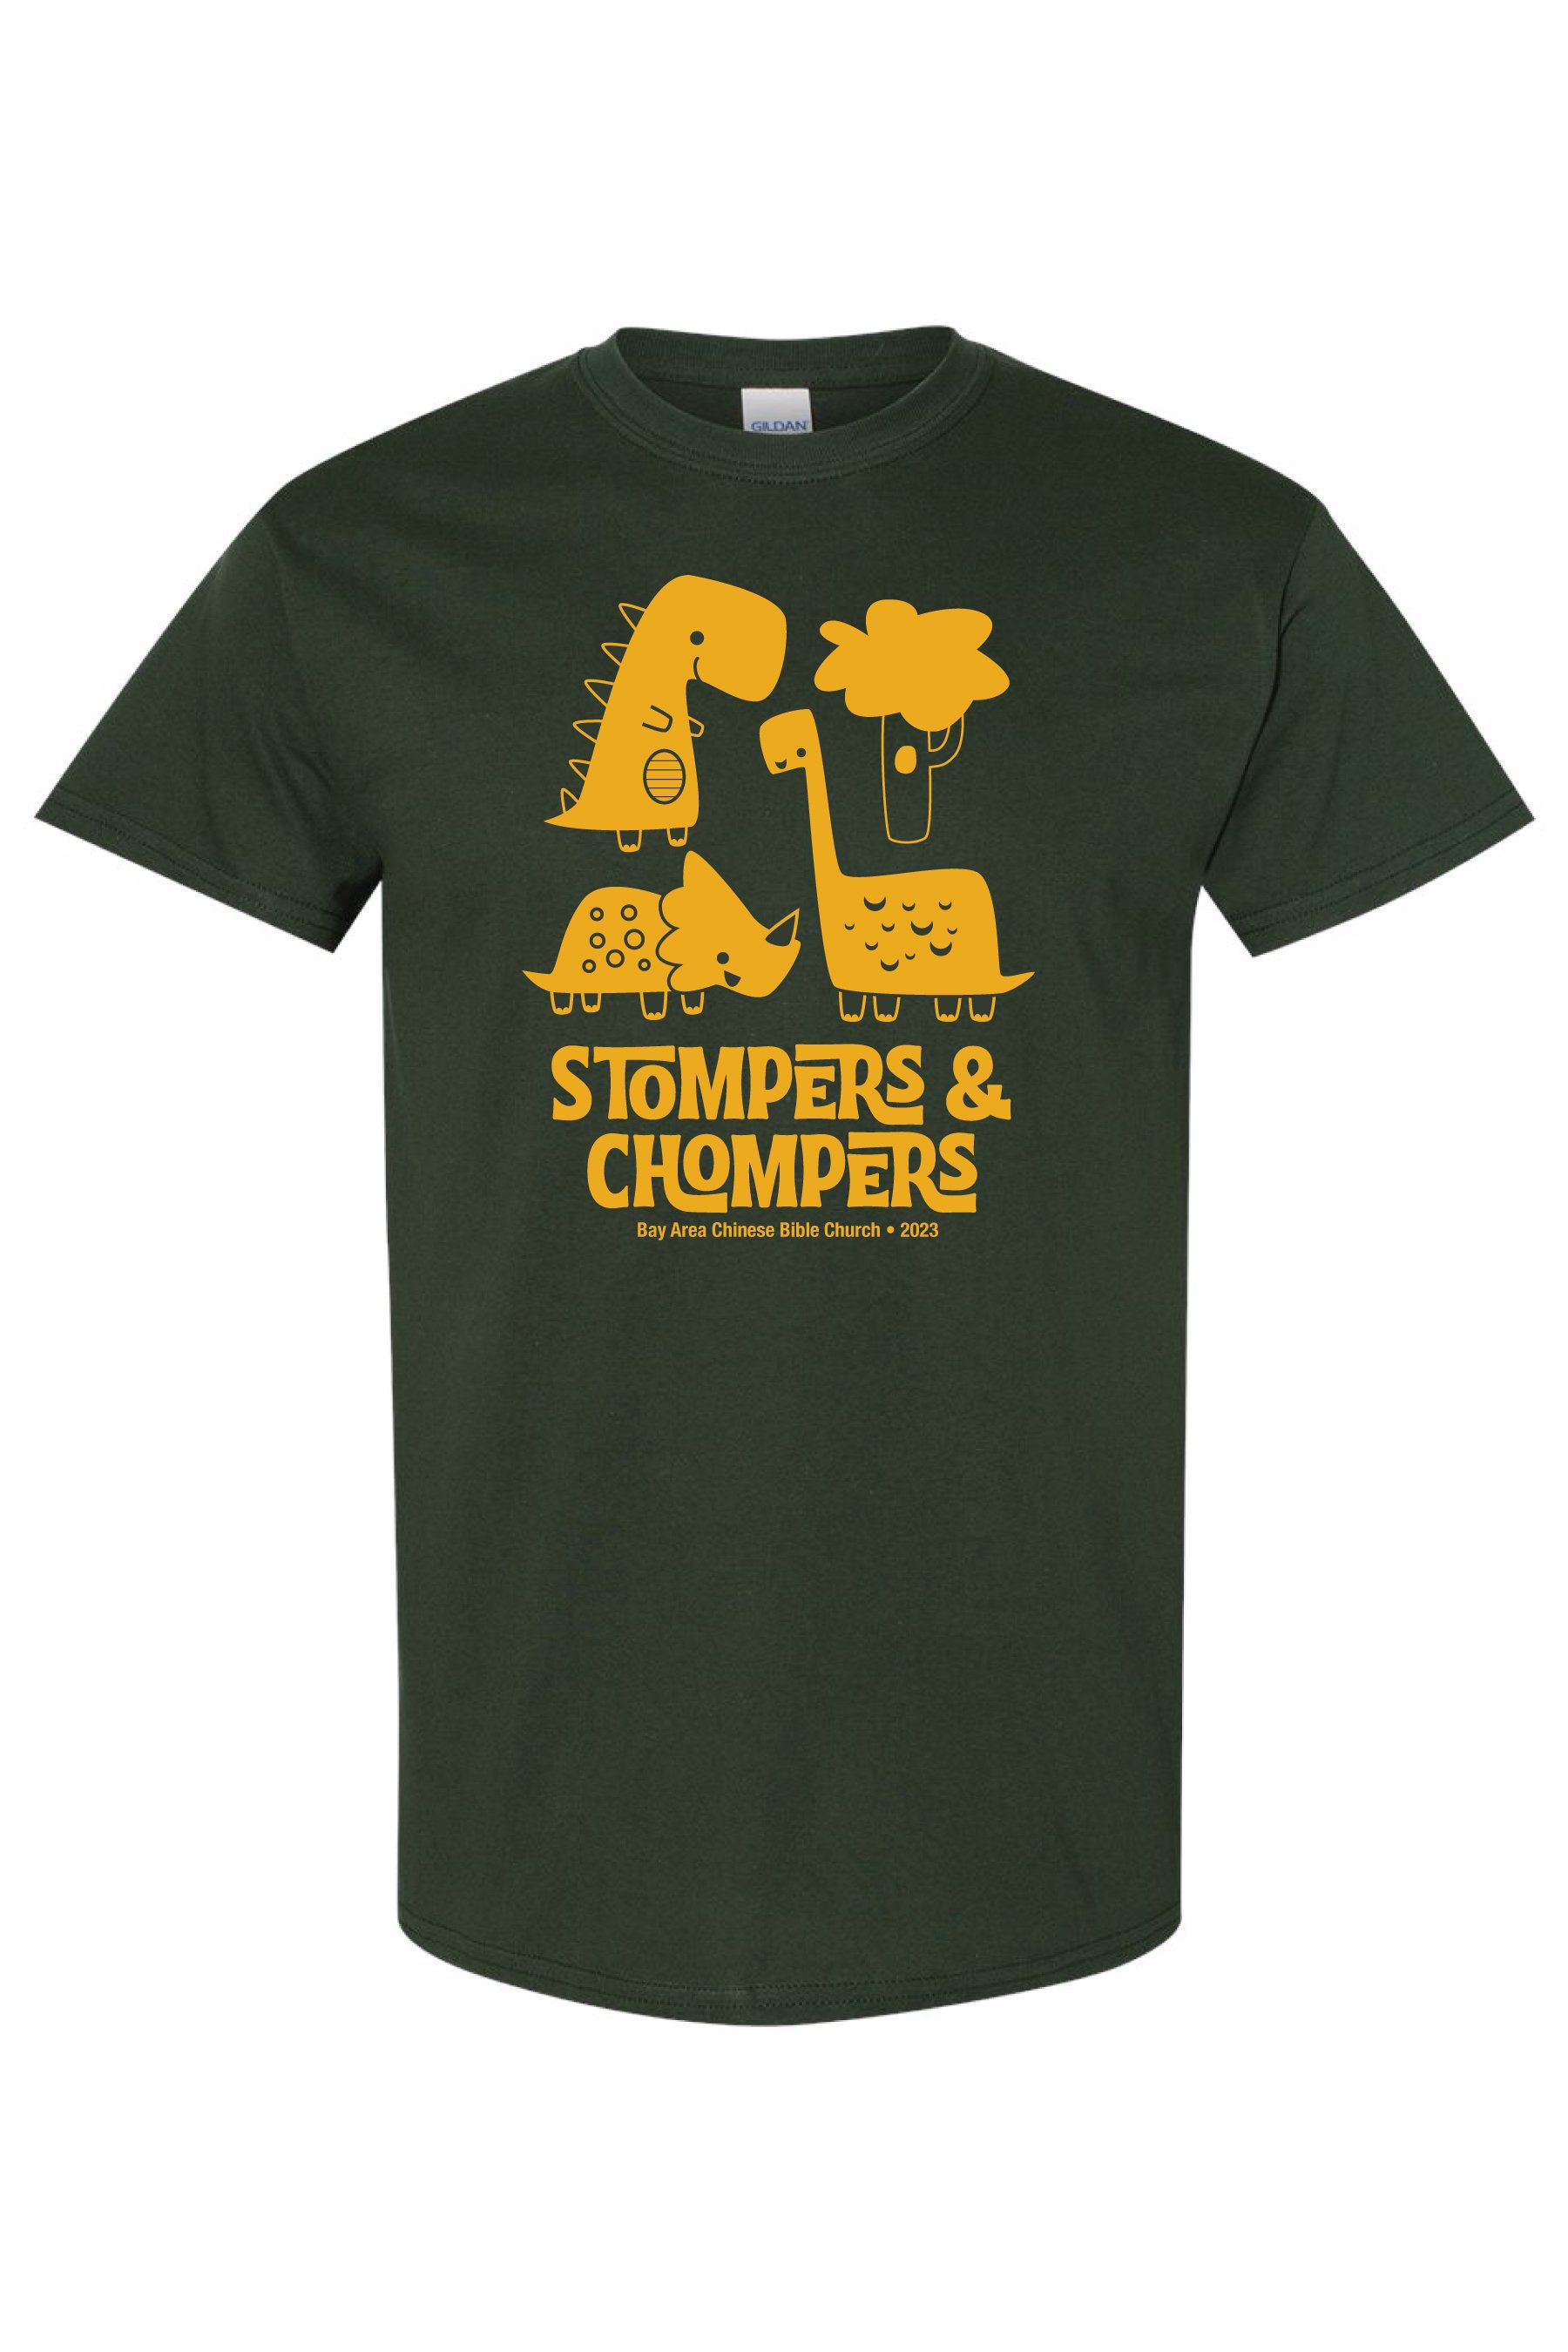 Chompers and Stompers-02.jpg